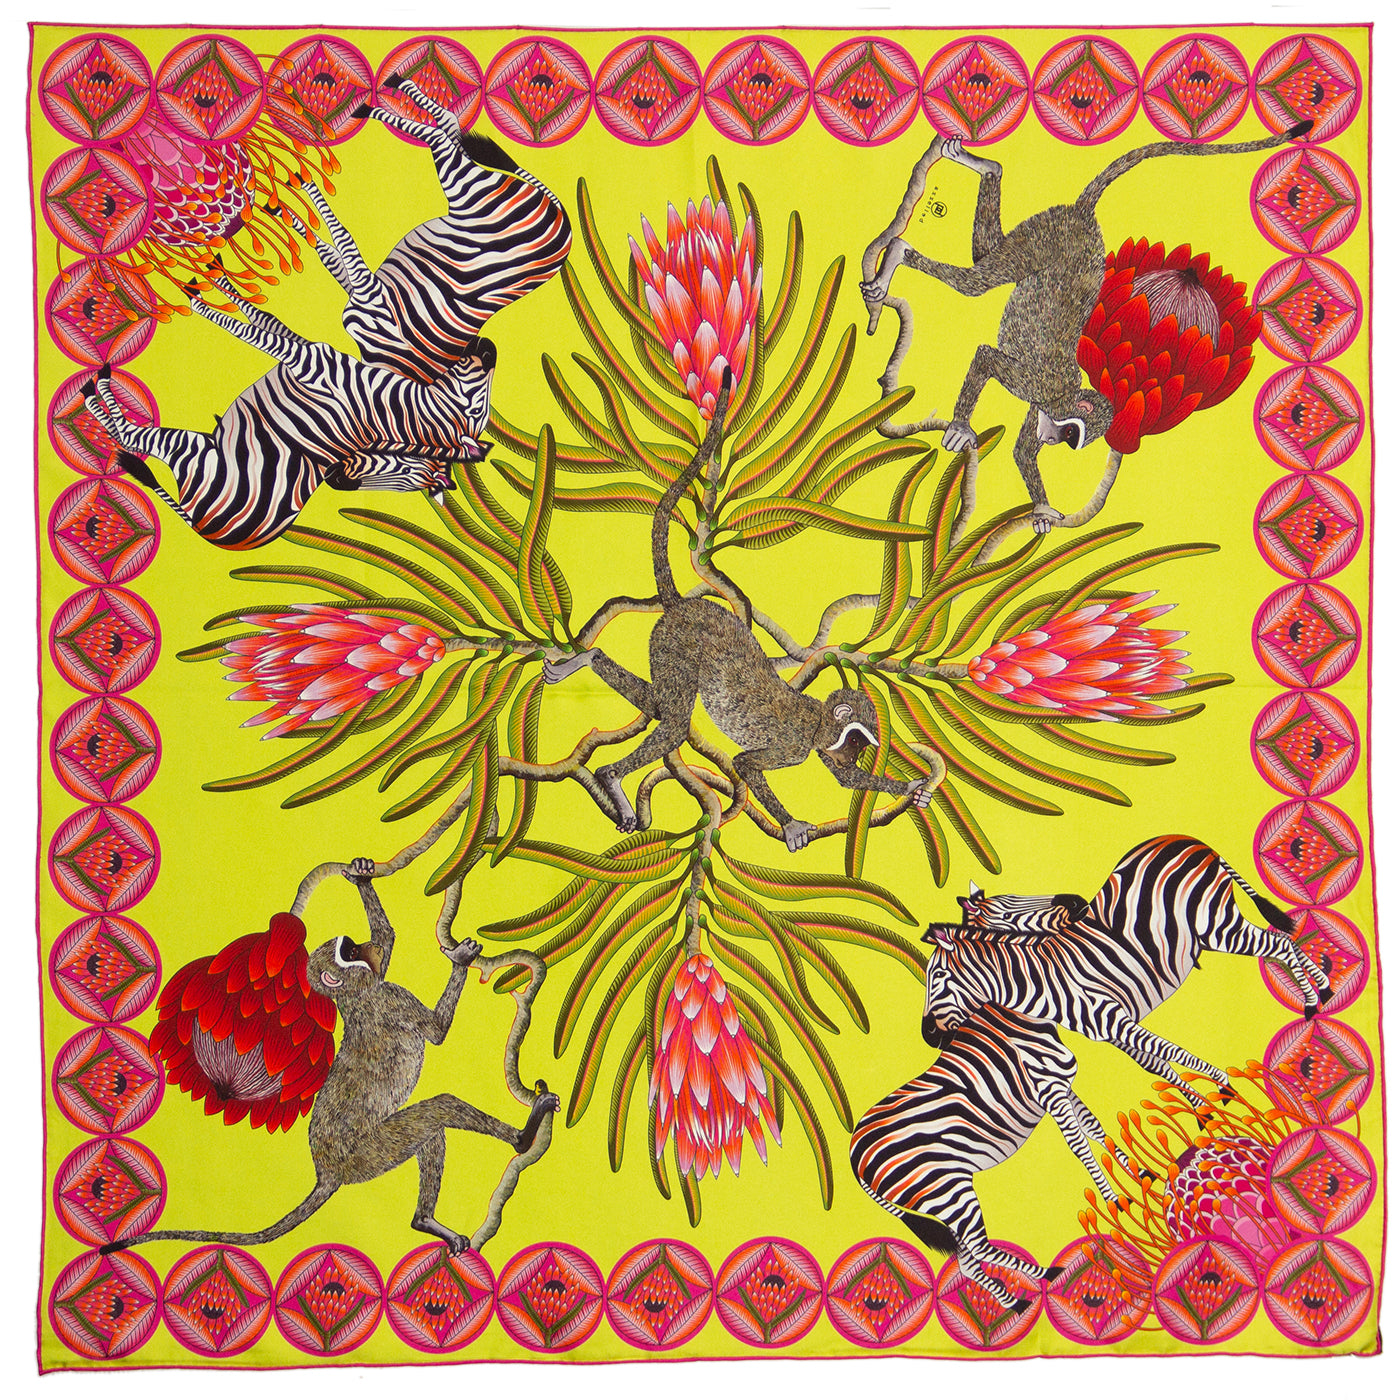 Lime and yellow silk scarf with Zebras Monkies and Protea flowers